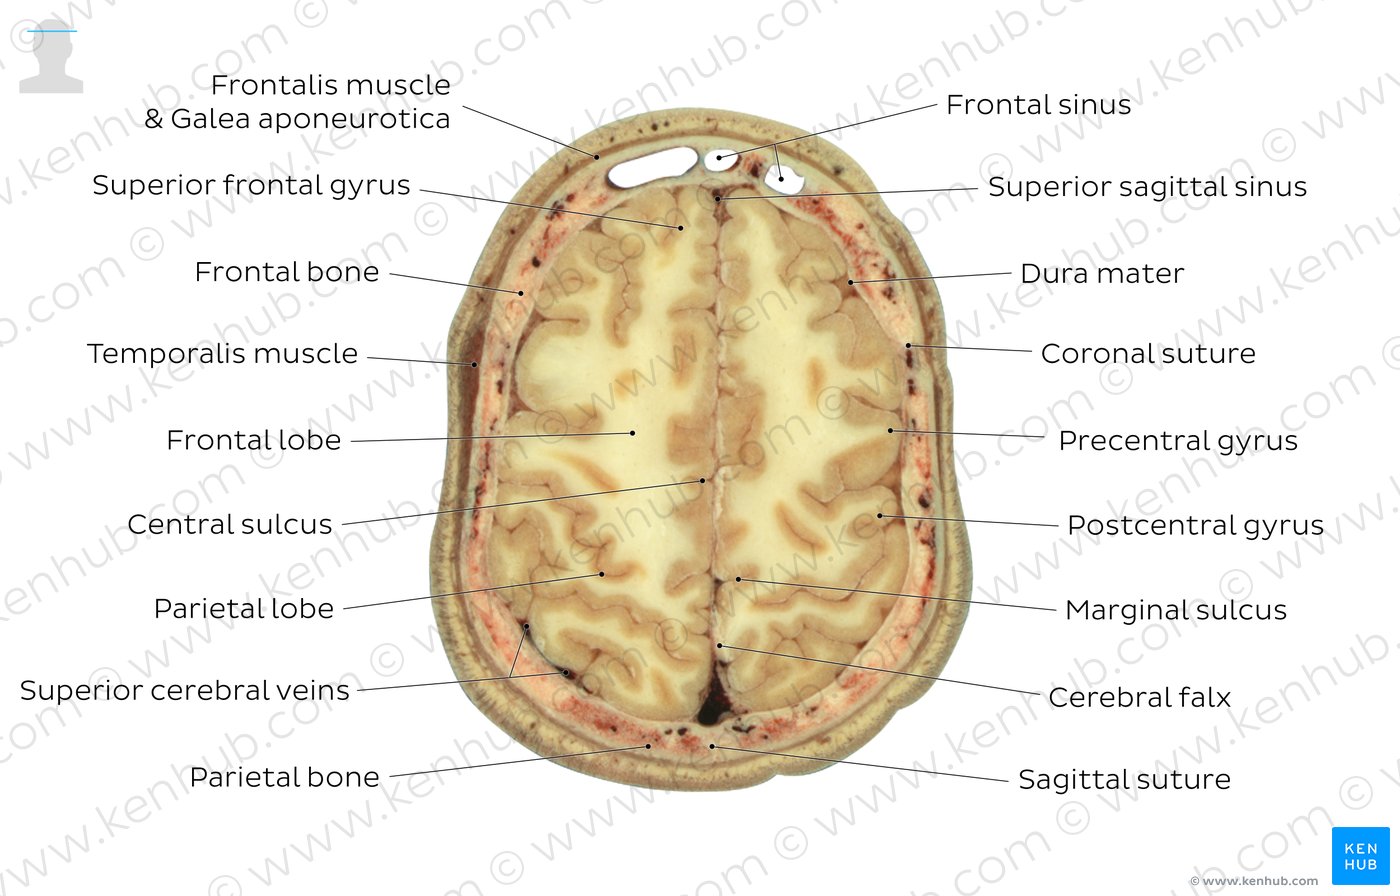 Frontal sinus level: Overview